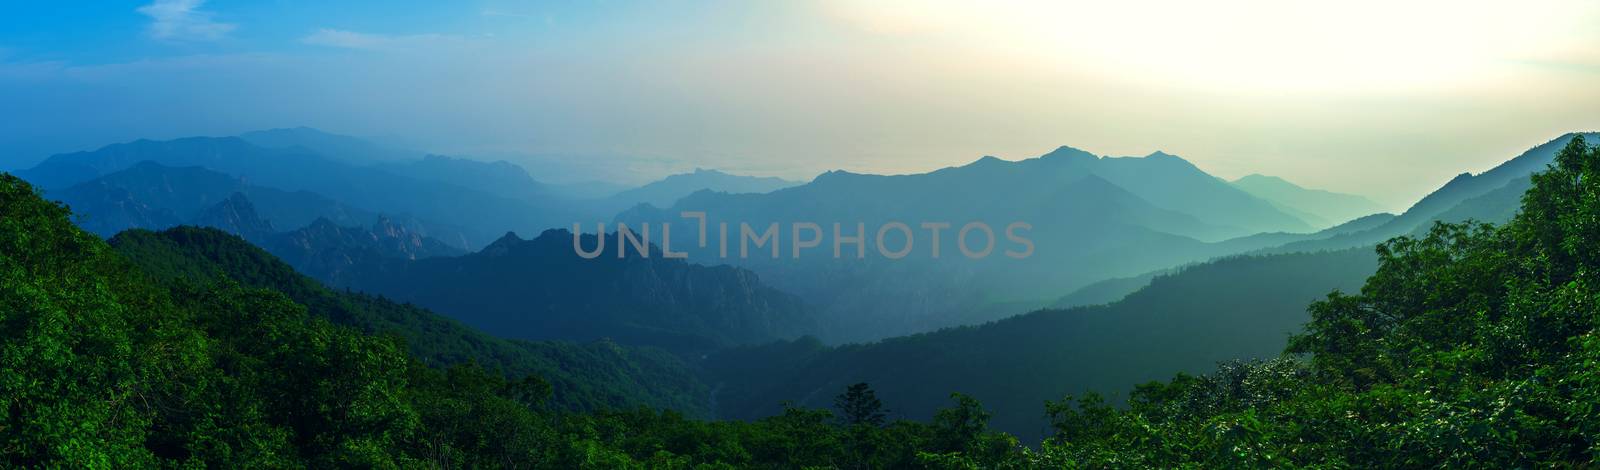 Sunrise at Seoraksan National Park, The best of Mountain in Sout by gutarphotoghaphy